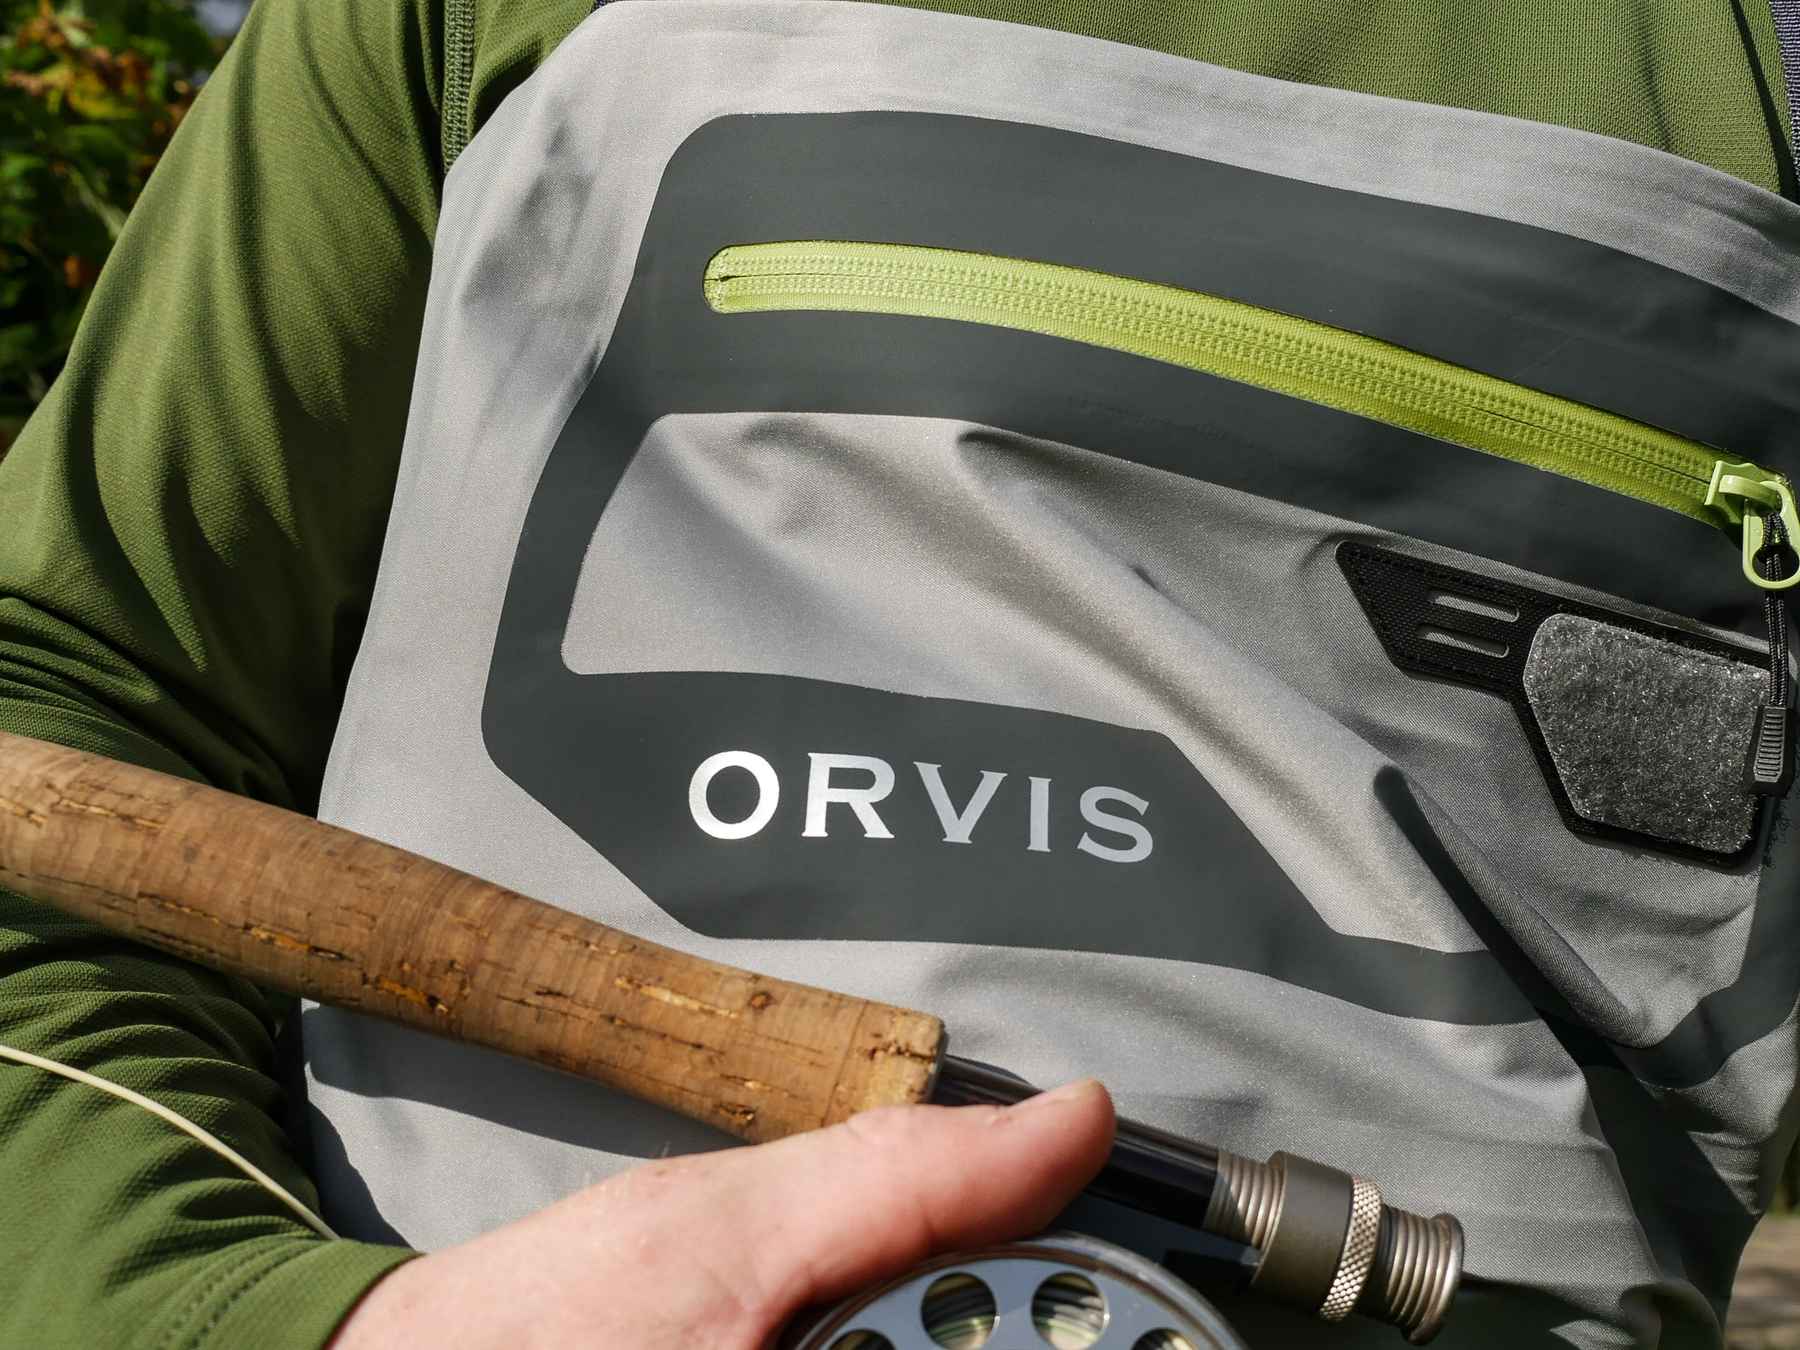 Orvis Waders Size Chart